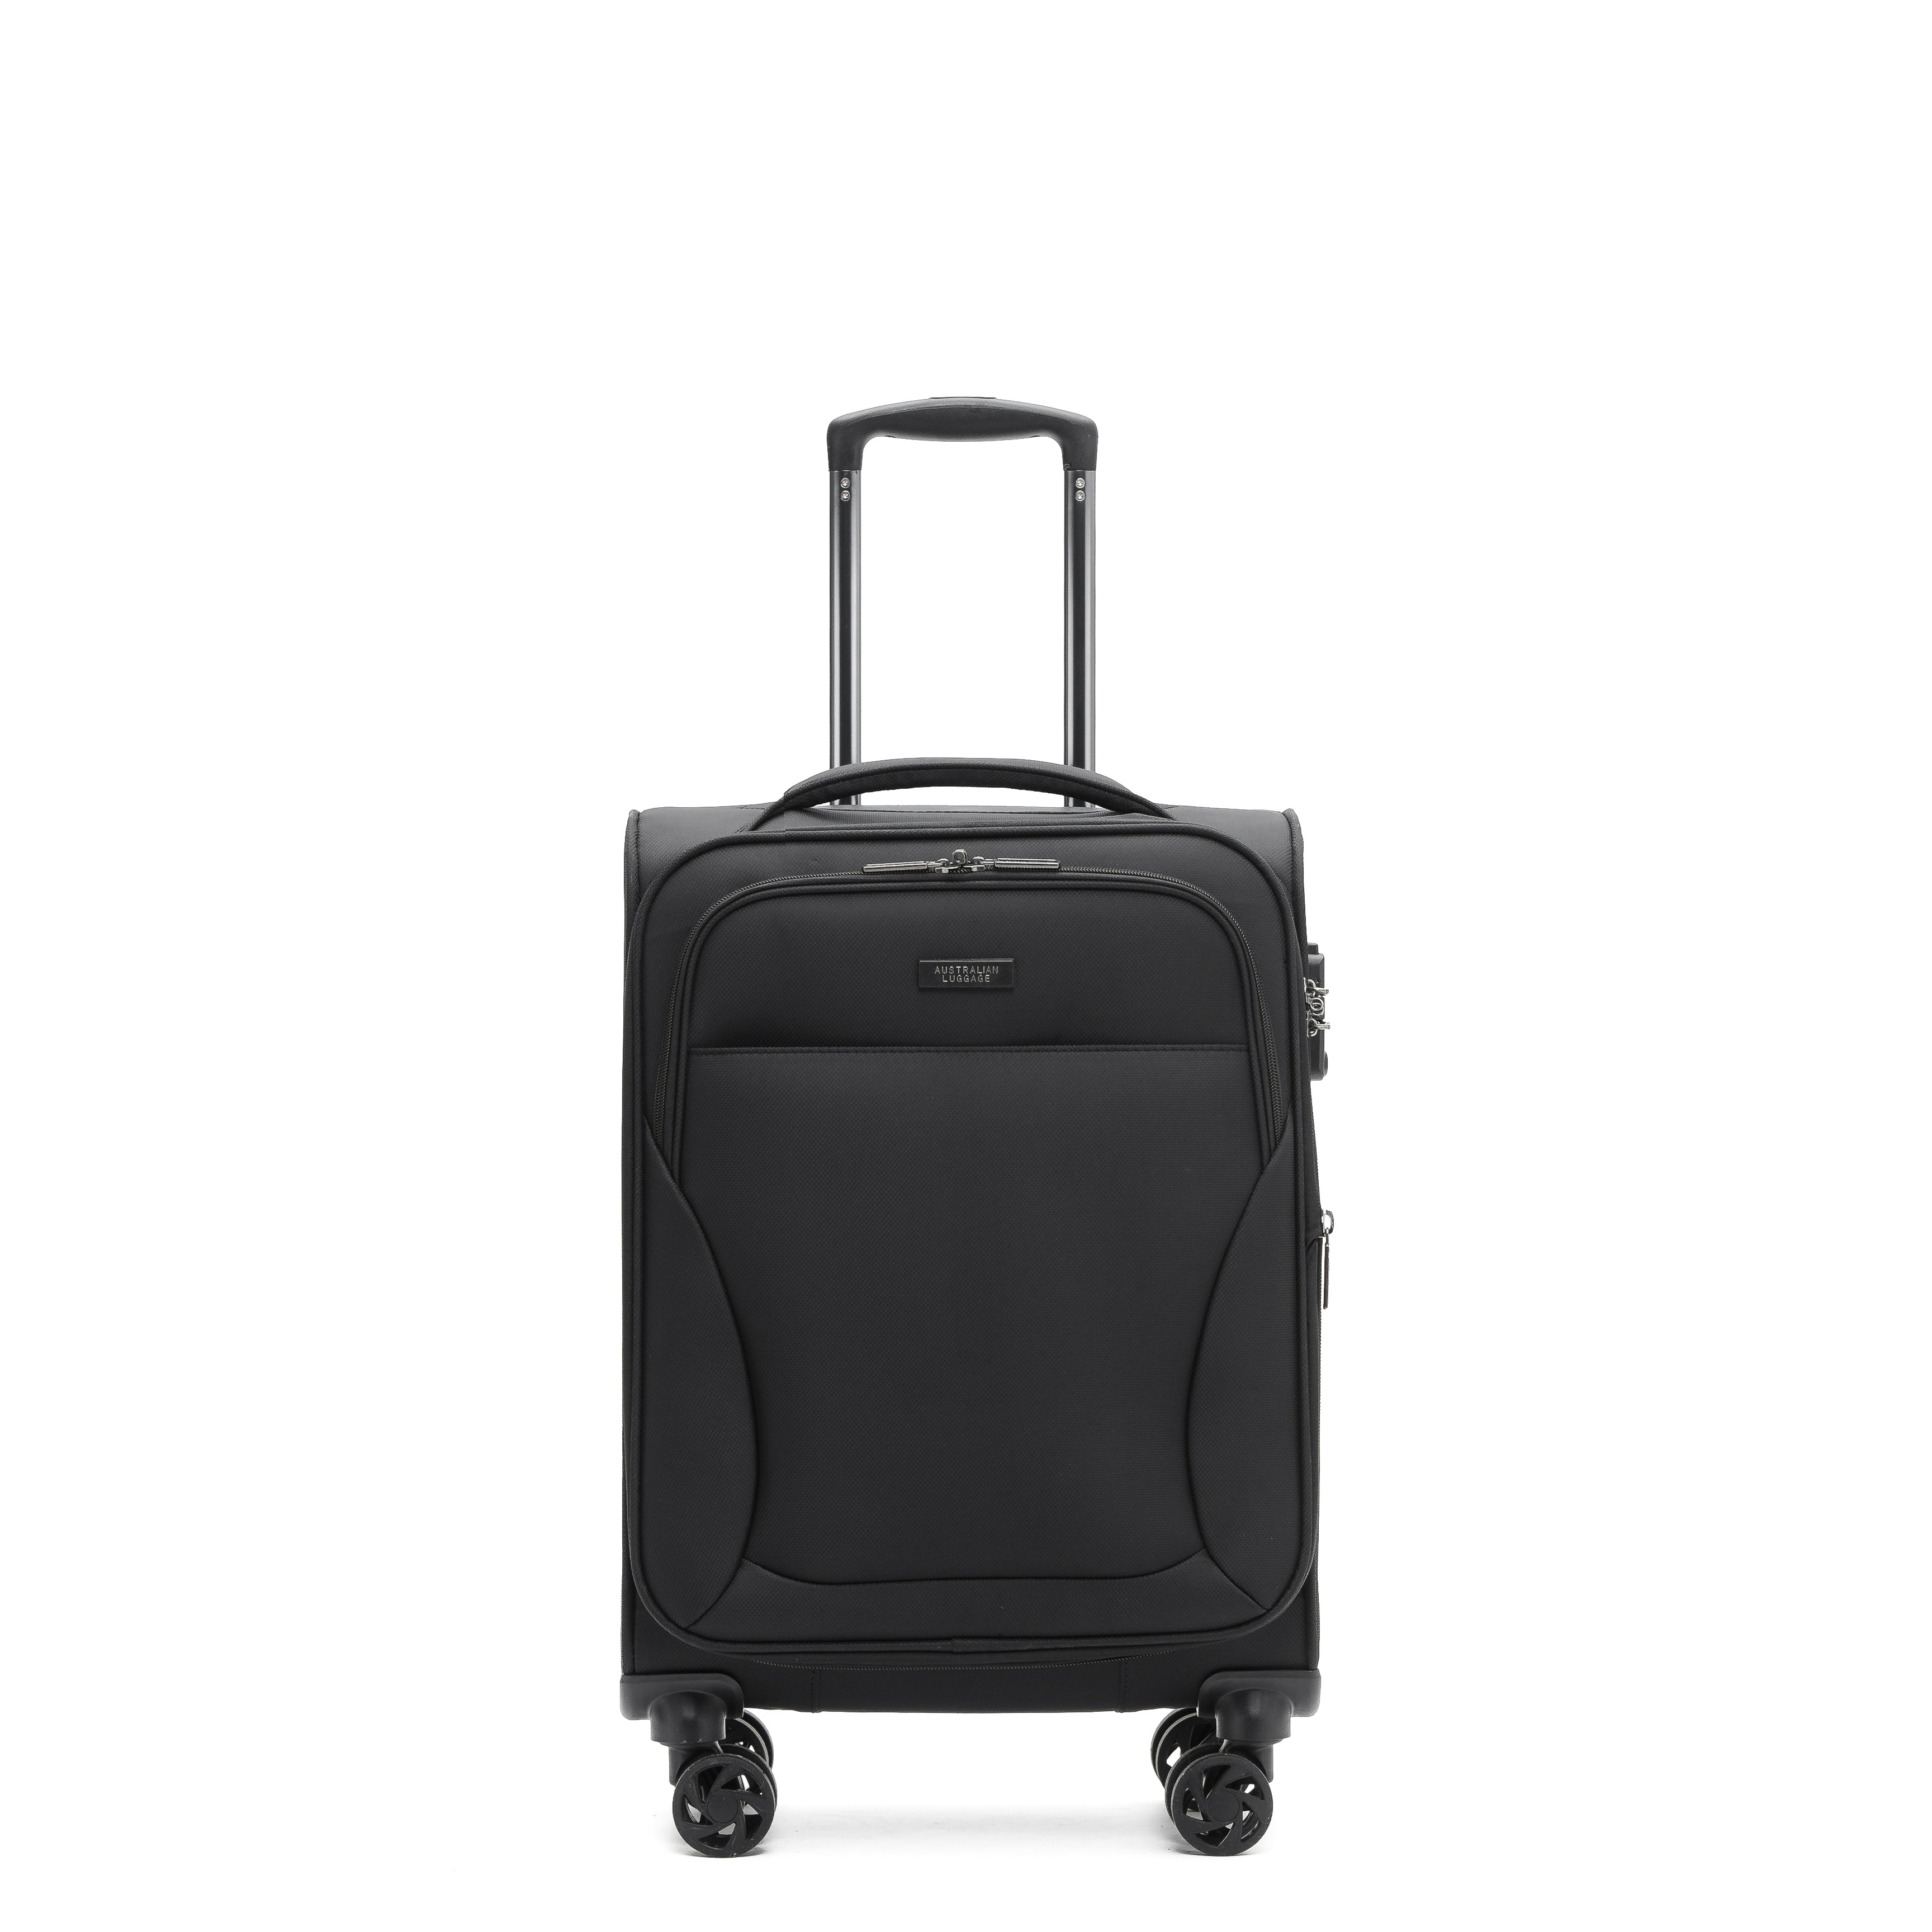 AUS LUGGAGE - WINGS Trolley Case 20in Small - BLACK